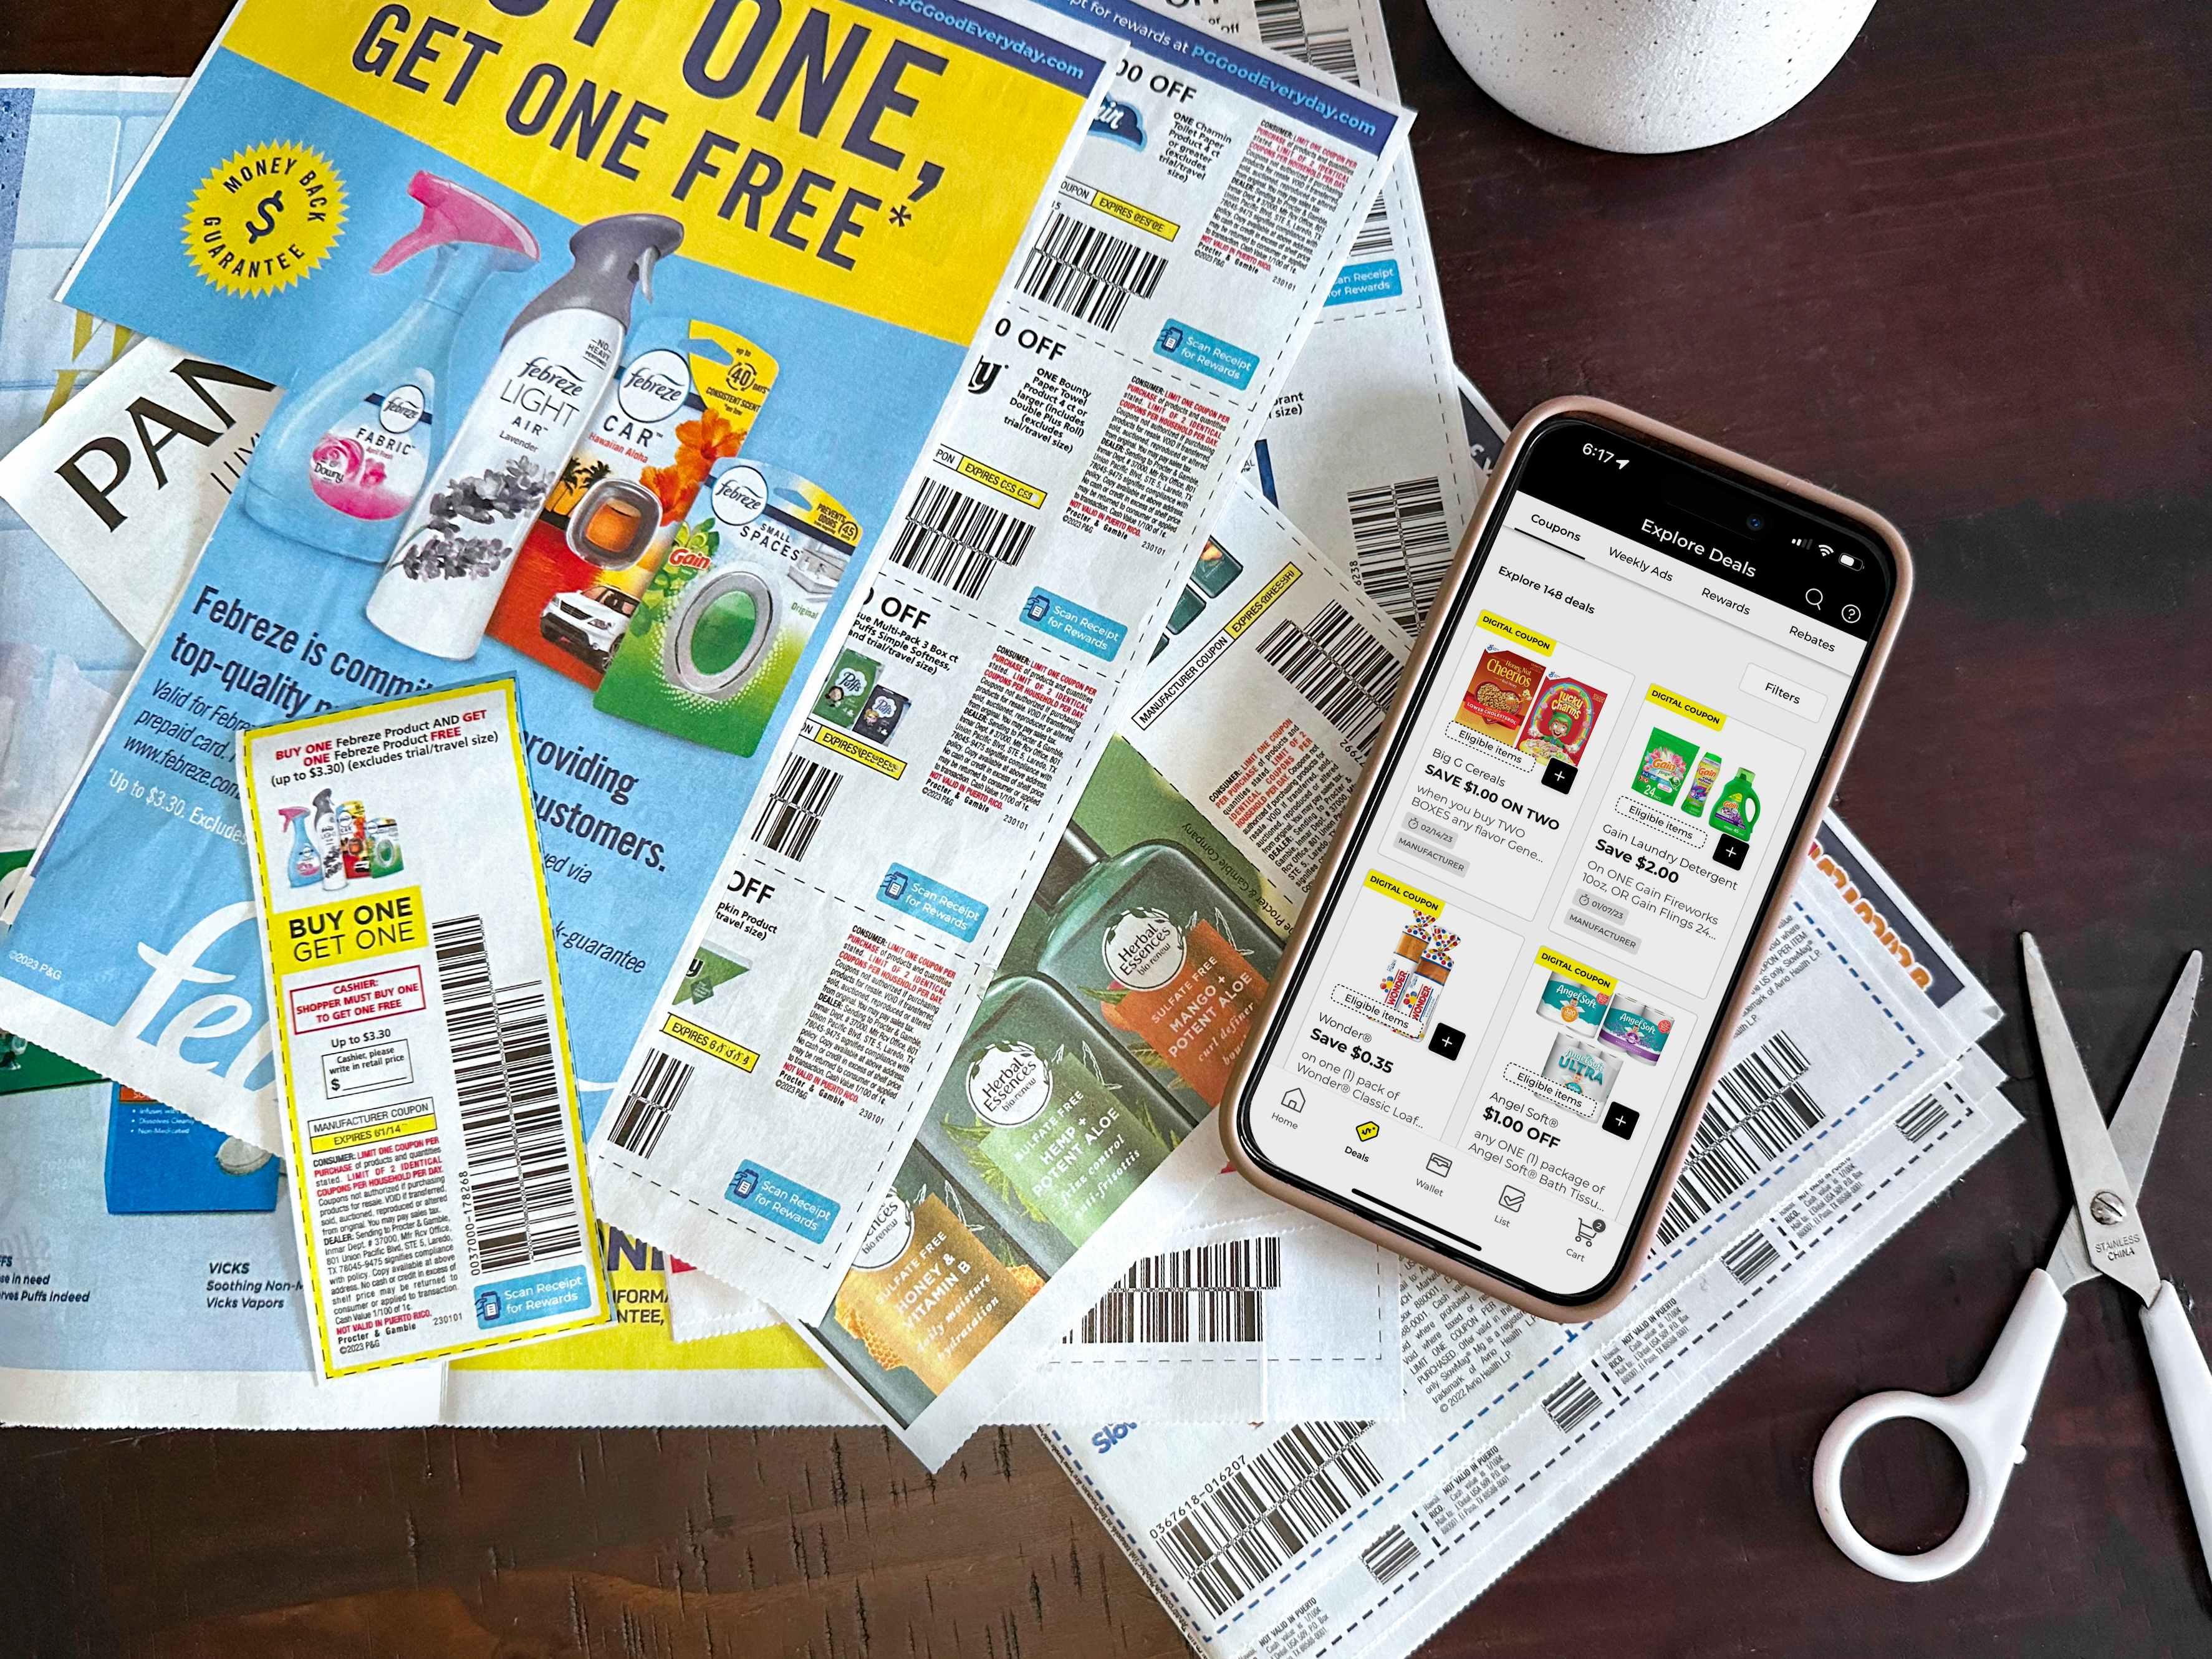 A phone displaying digital coupons in the Dollar General app on a table with some paper manufacturer coupons that have been cut